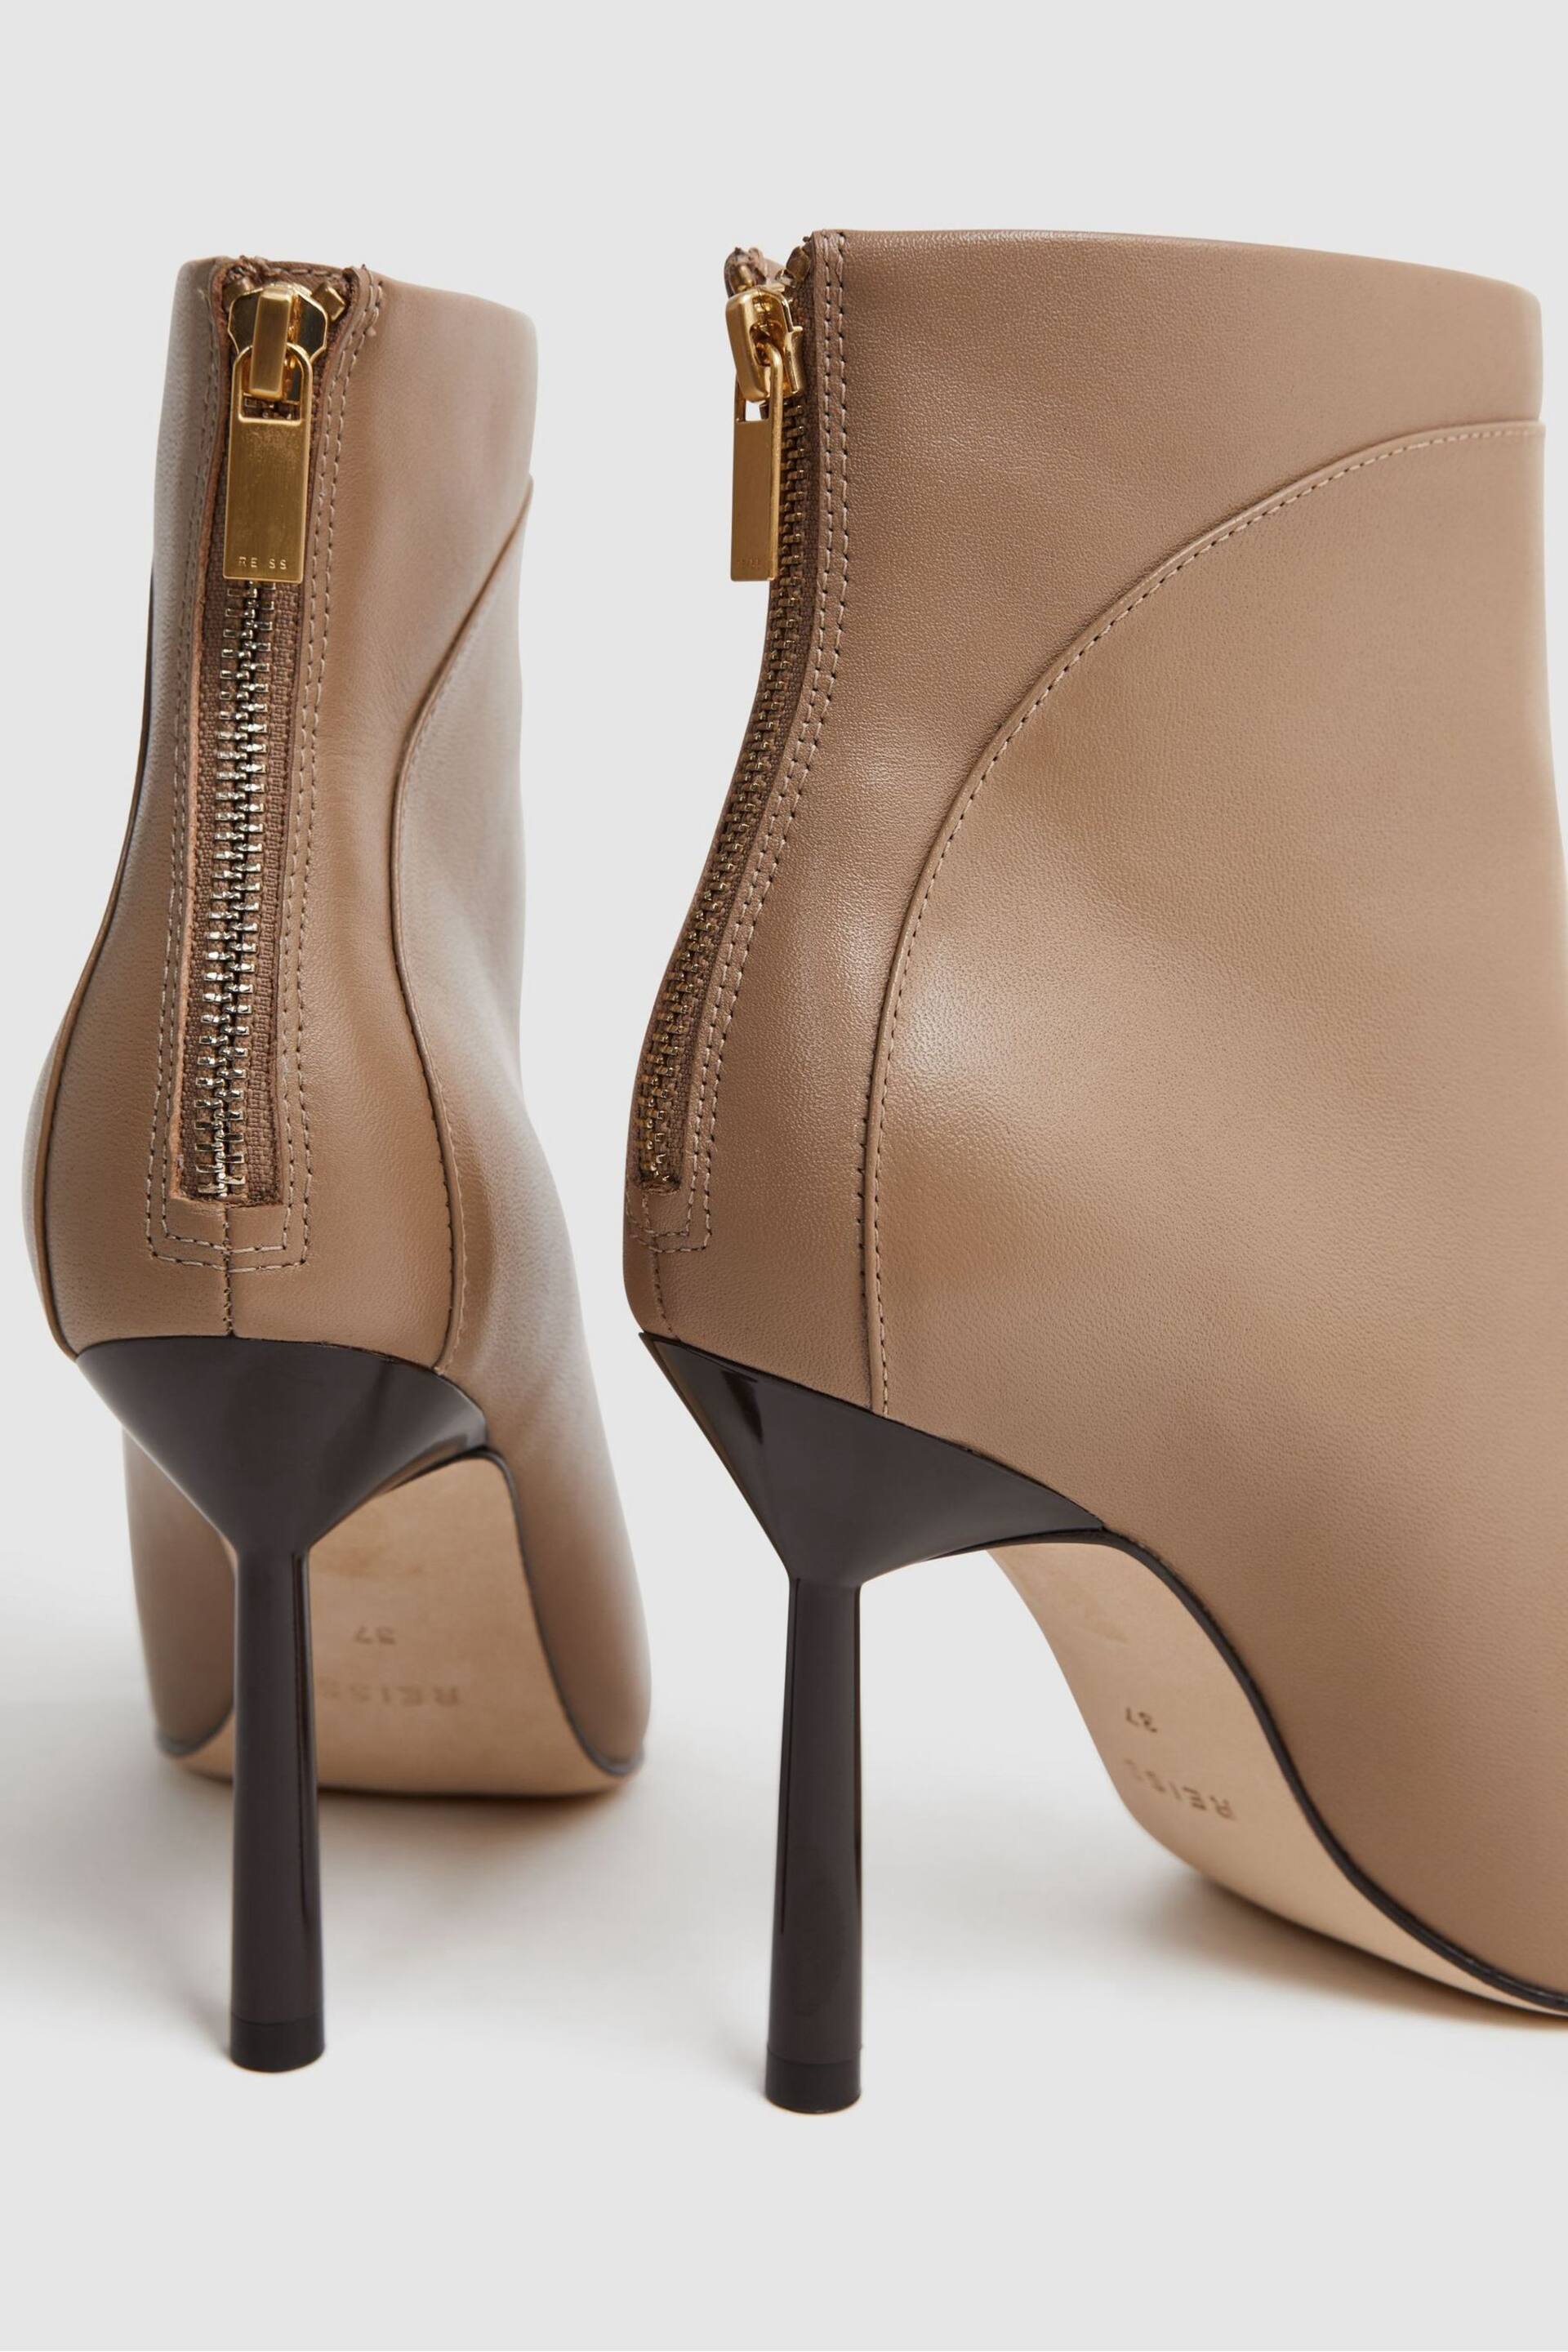 Reiss Camel Lyra Signature Leather Ankle Boots - Image 5 of 5